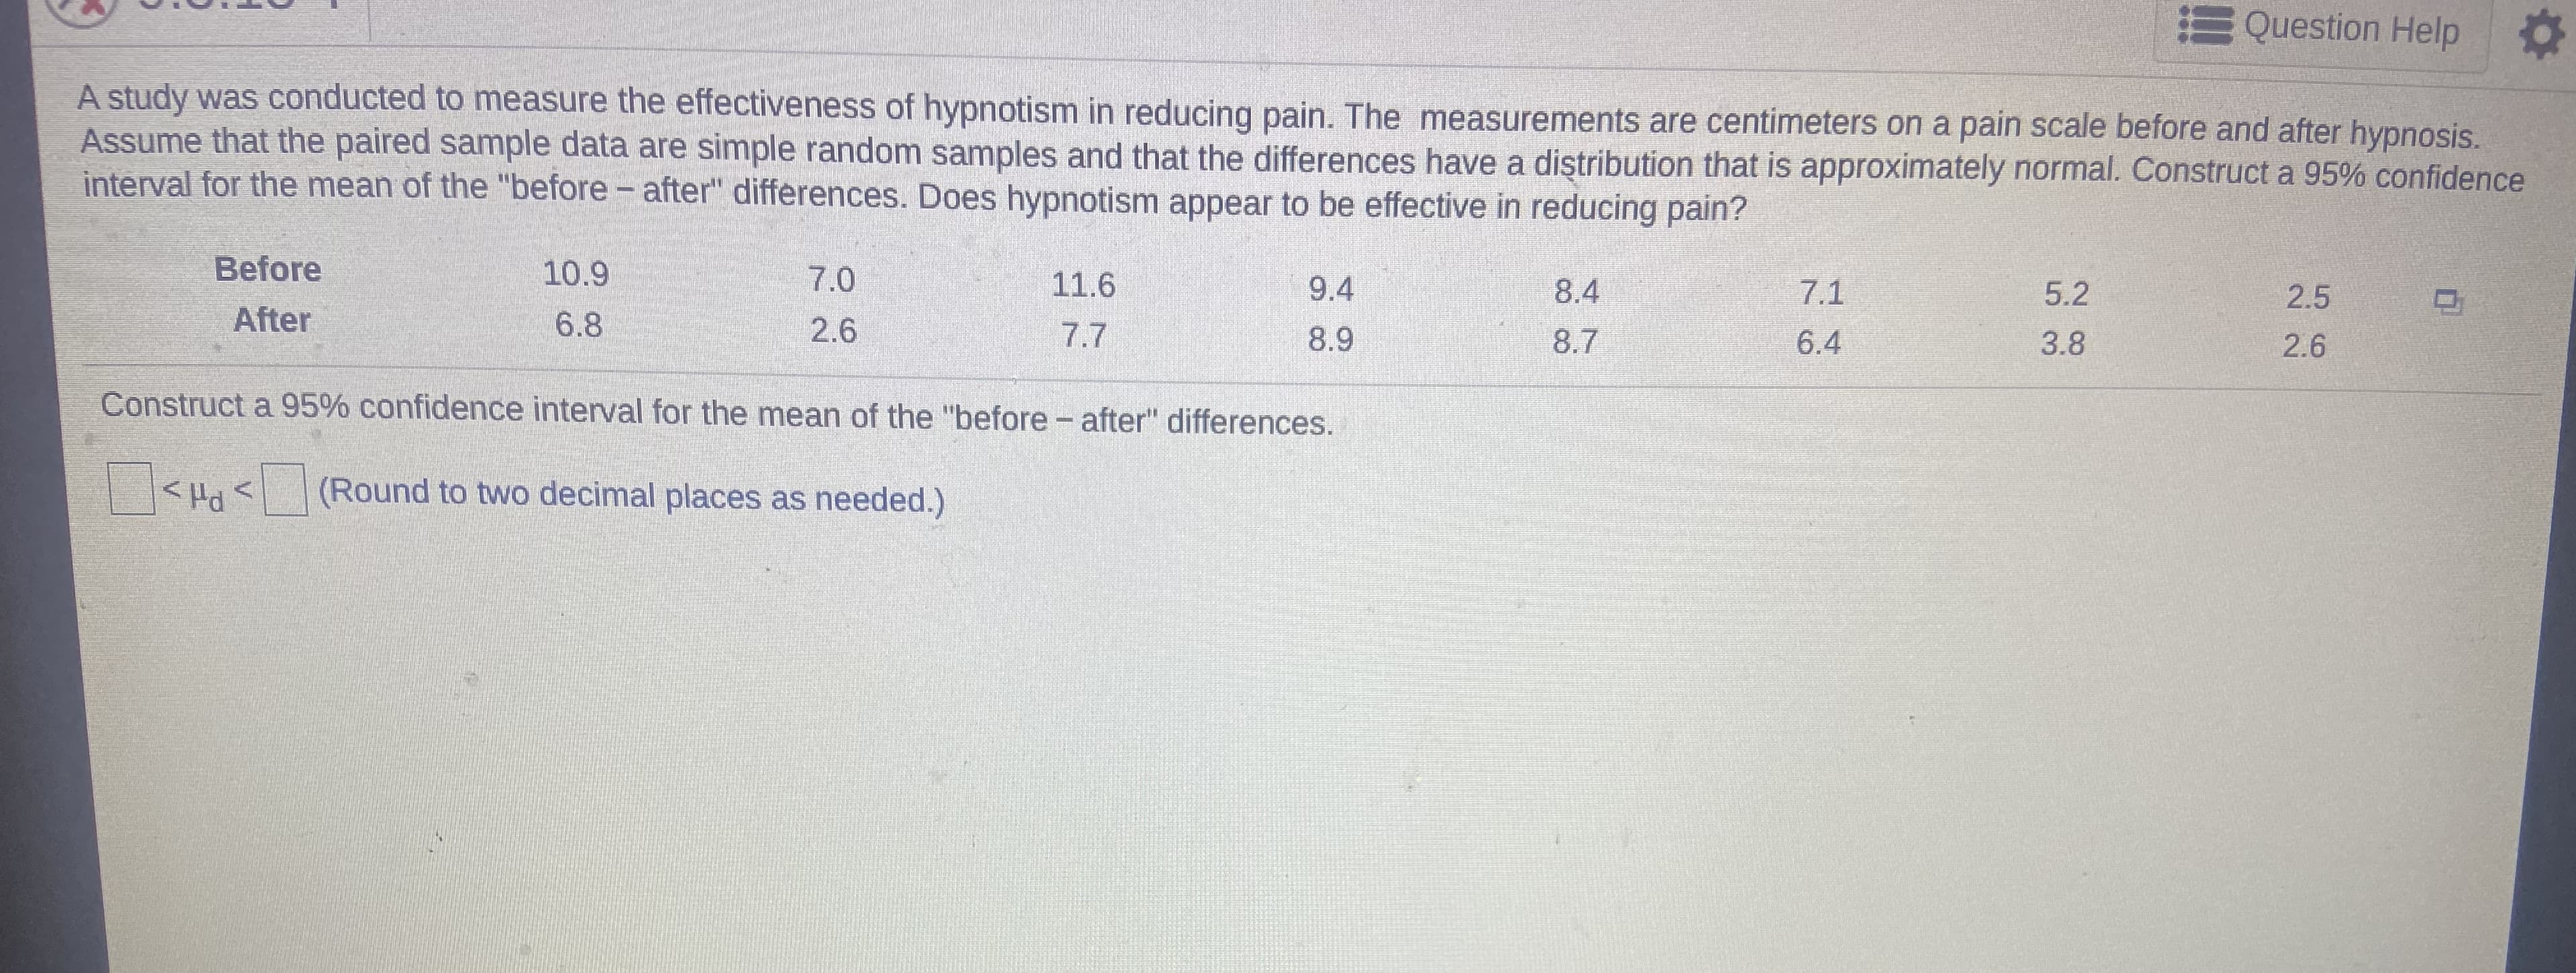 E Question Help
A study was conducted to measure the effectiveness of hypnotism in reducing pain. The measurements are centimeters on a pain scale before and after hypnosis.
Assume that the paired sample data are simple random samples and that the differences have a diştribution that is approximately normal. Construct a 95% confidence
interval for the mean of the "before - after" differences. Does hypnotism appear to be effective in reducing pain?
Before
10.9
7.0
11.6
9.4
8.4
7.1
5.2
2.5
After
6.8
2.6
7.7
8.9
8.7
6.4
3.8
2.6
Construct a 95% confidence interval for the mean of the "before- after" differences.
> Prl>
(Round to two decimal places as needed.)
